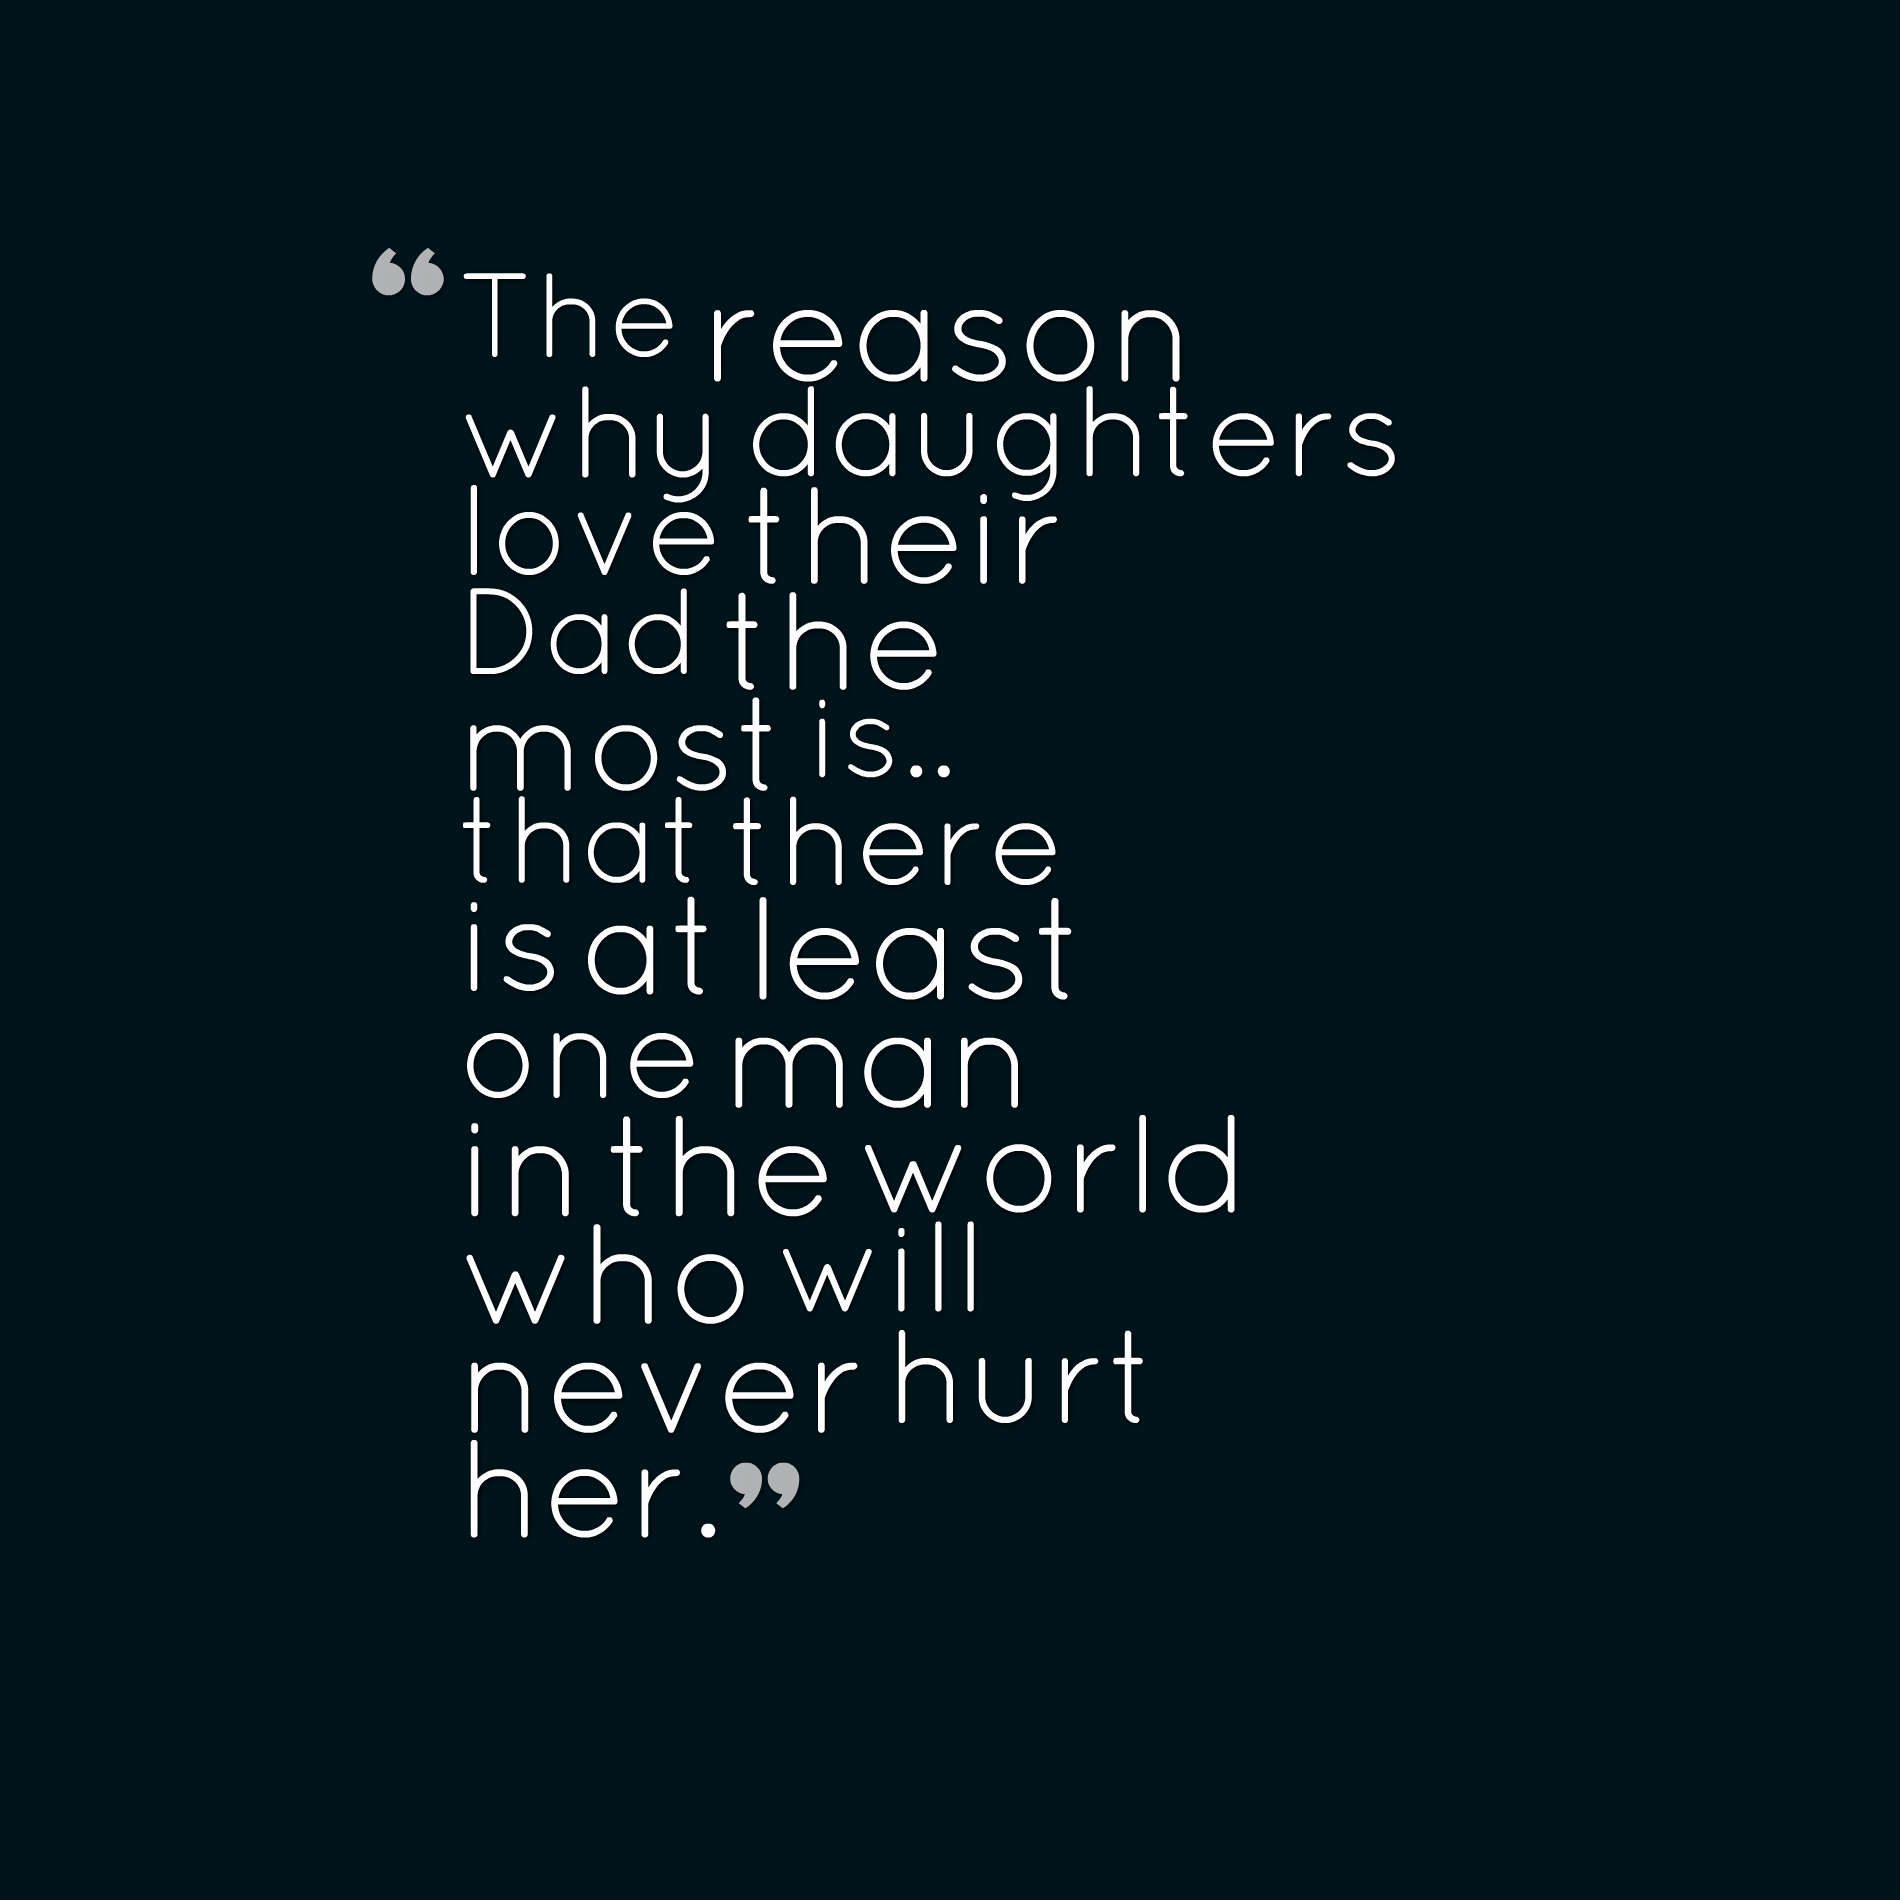 The reason why daughters love their Dad the most is.. that there is at least one man in the world who will never hurt her.